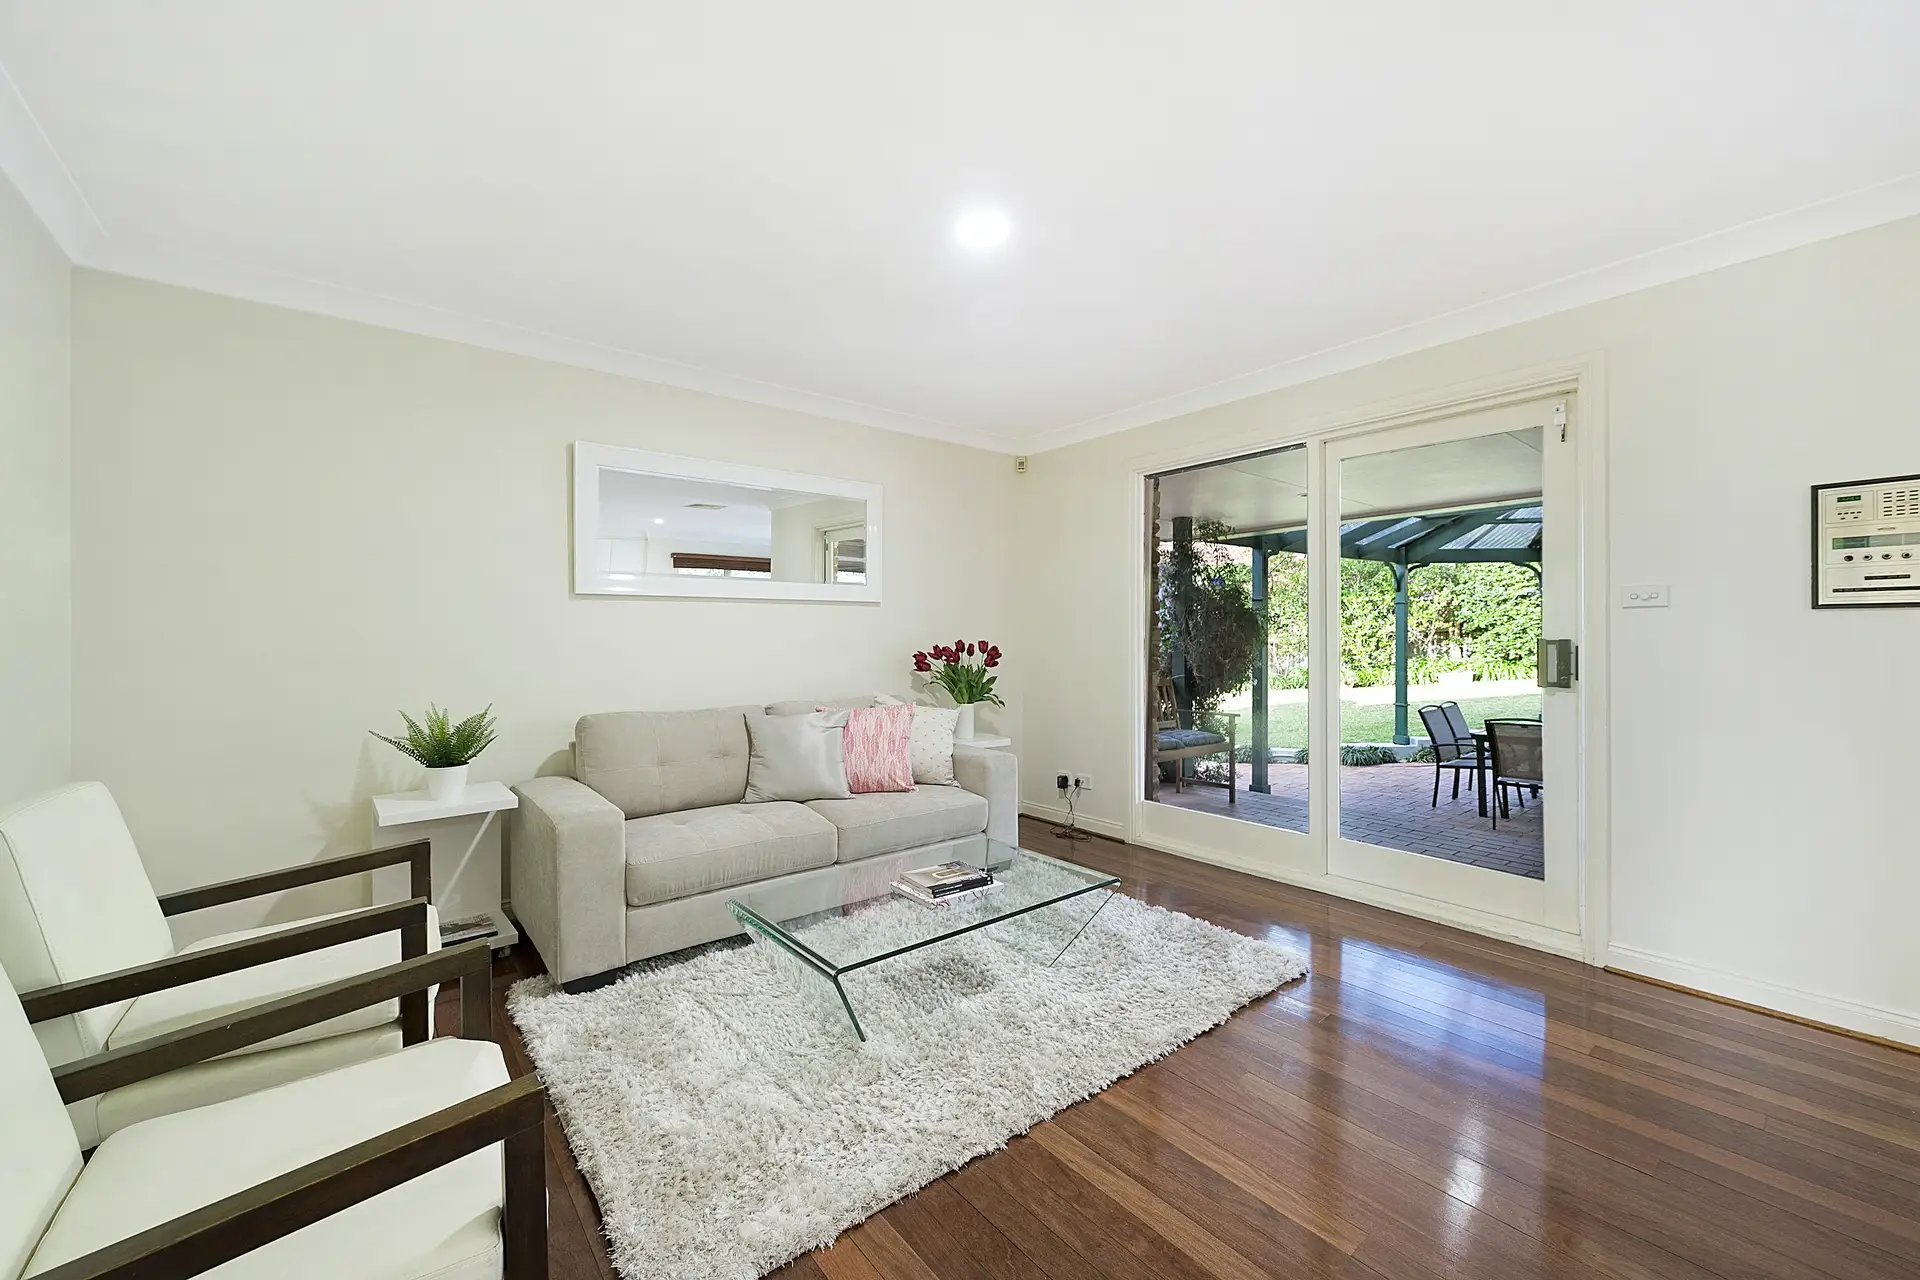 Photo #5: 8 Mildara Place, West Pennant Hills - Sold by Louis Carr Real Estate